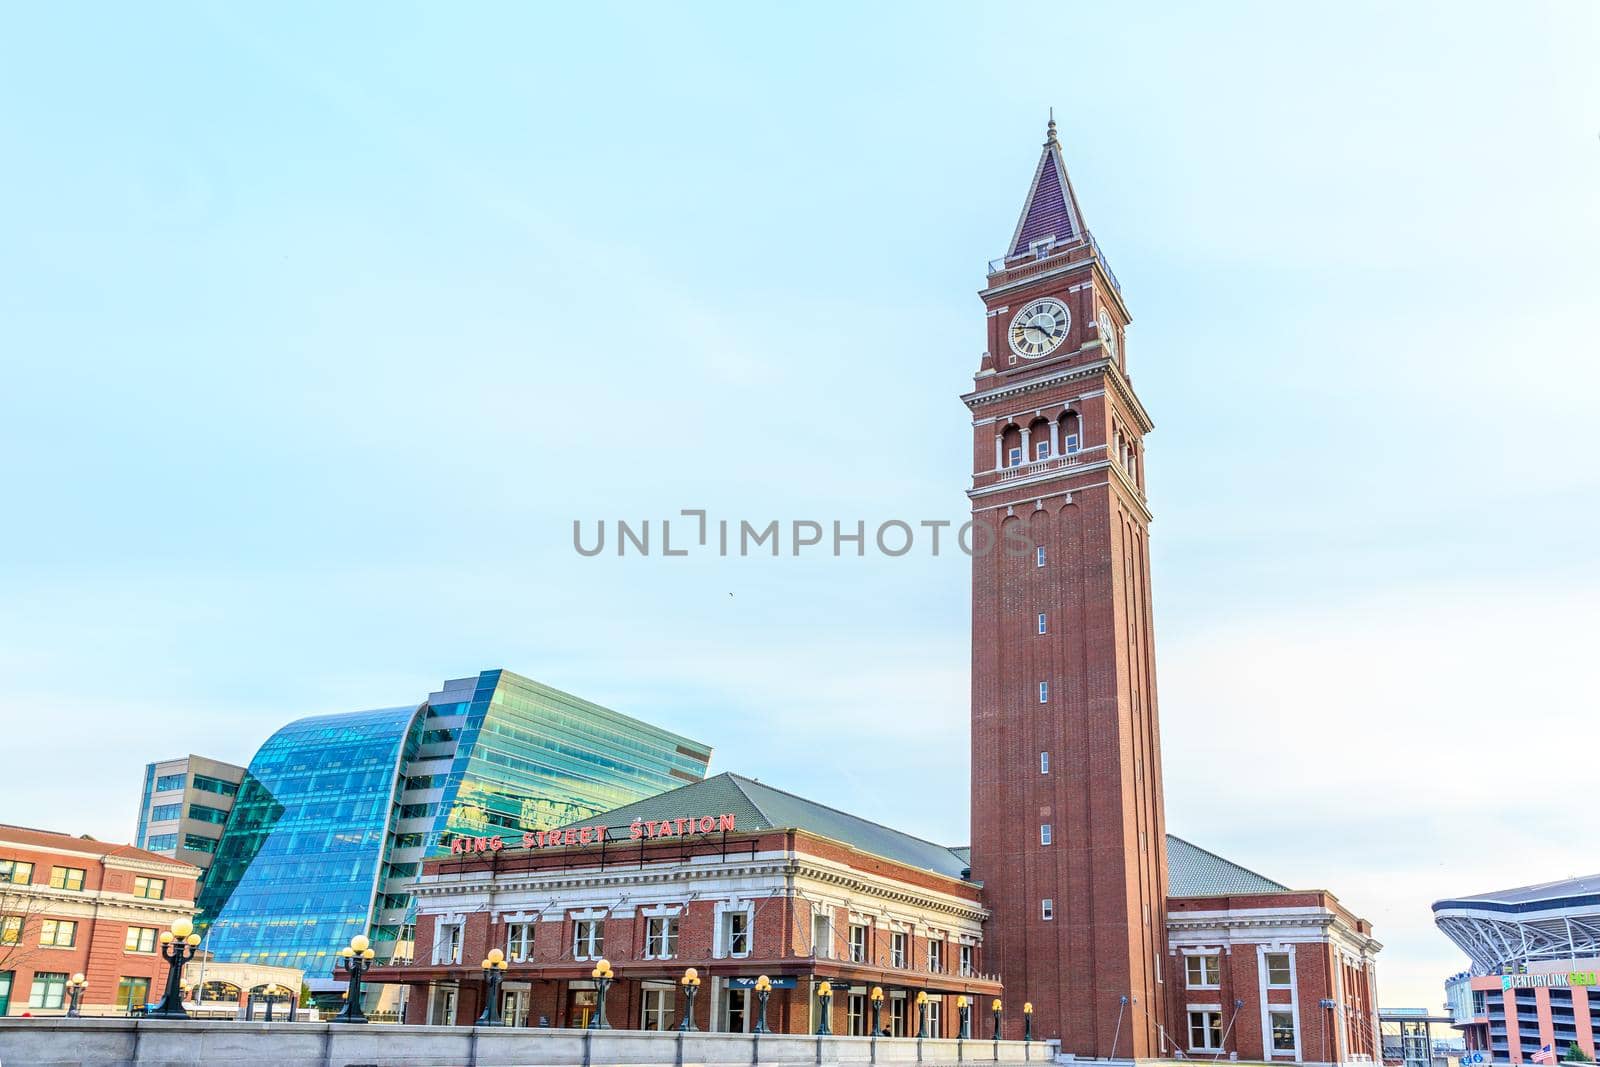 Seattle, Washington - March 5, 2015: King Street Station is a train station built in 1906, with clock tower as the local landmark.